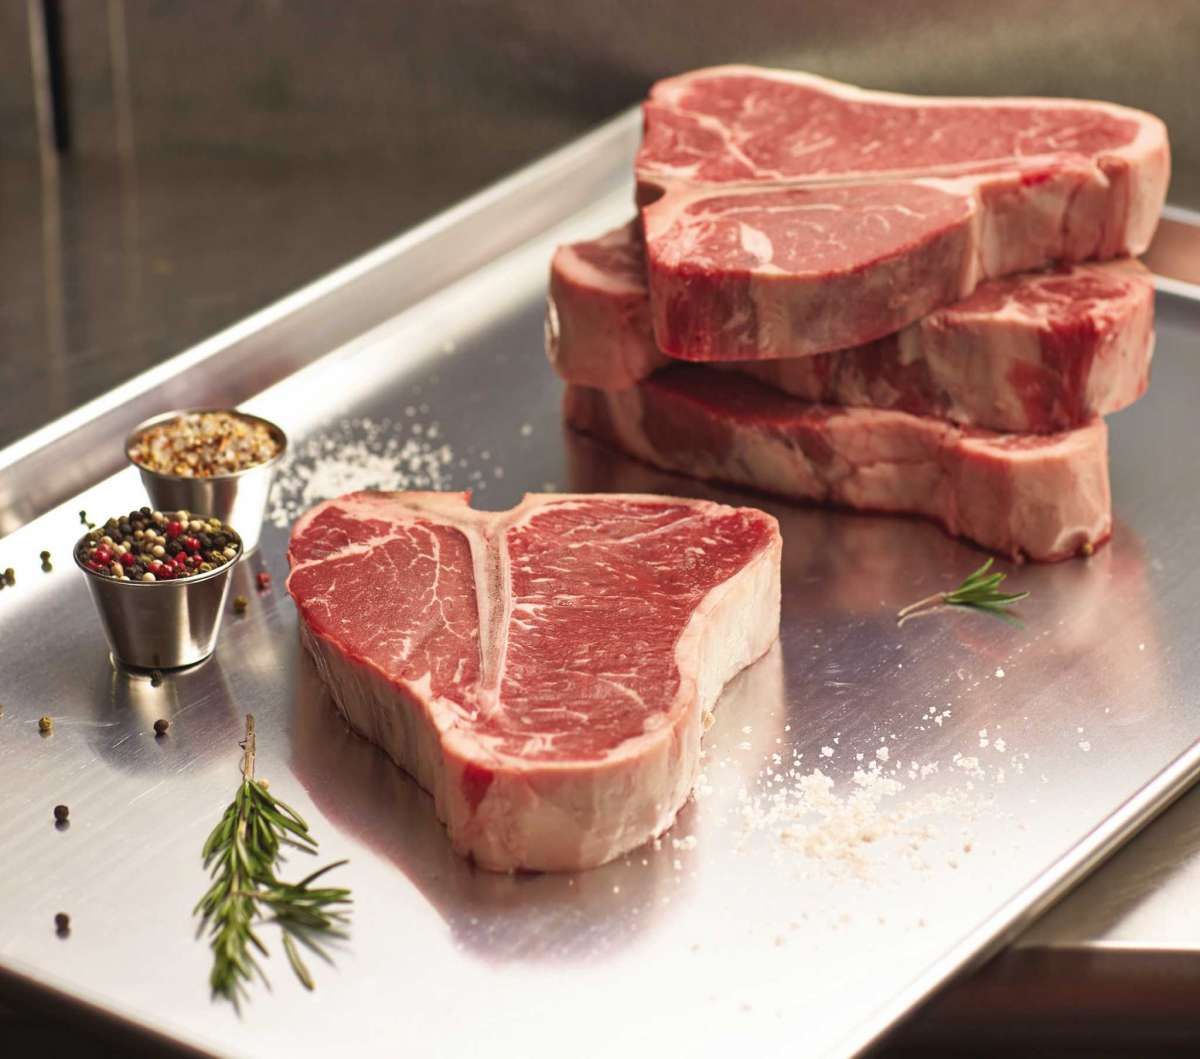 Omaha Steaks opens larger Houston store with new concept